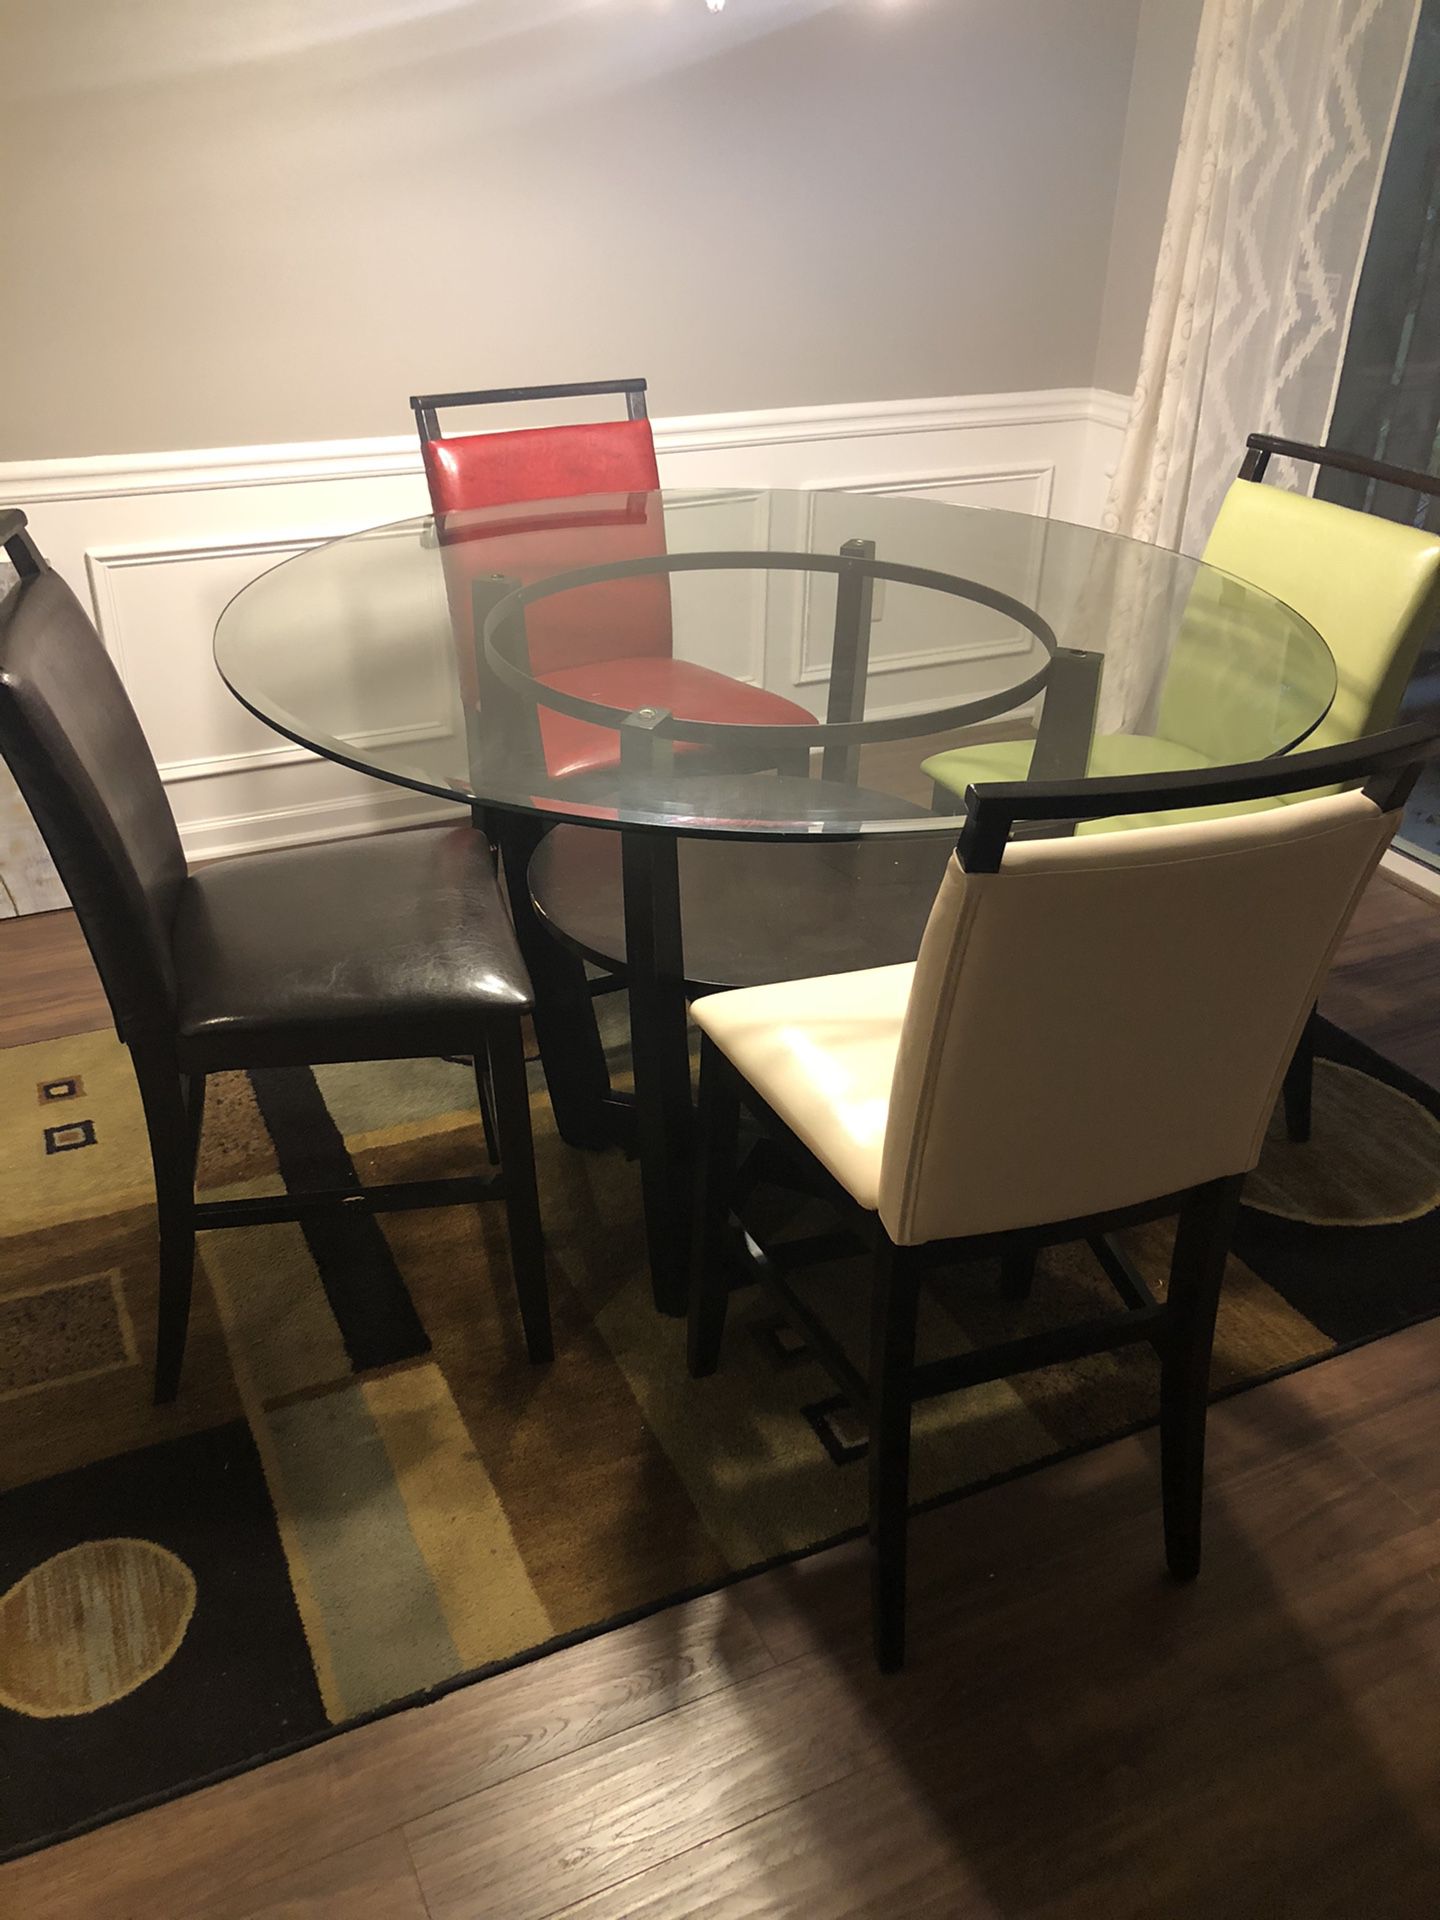 Dining room table w 4 chairs.